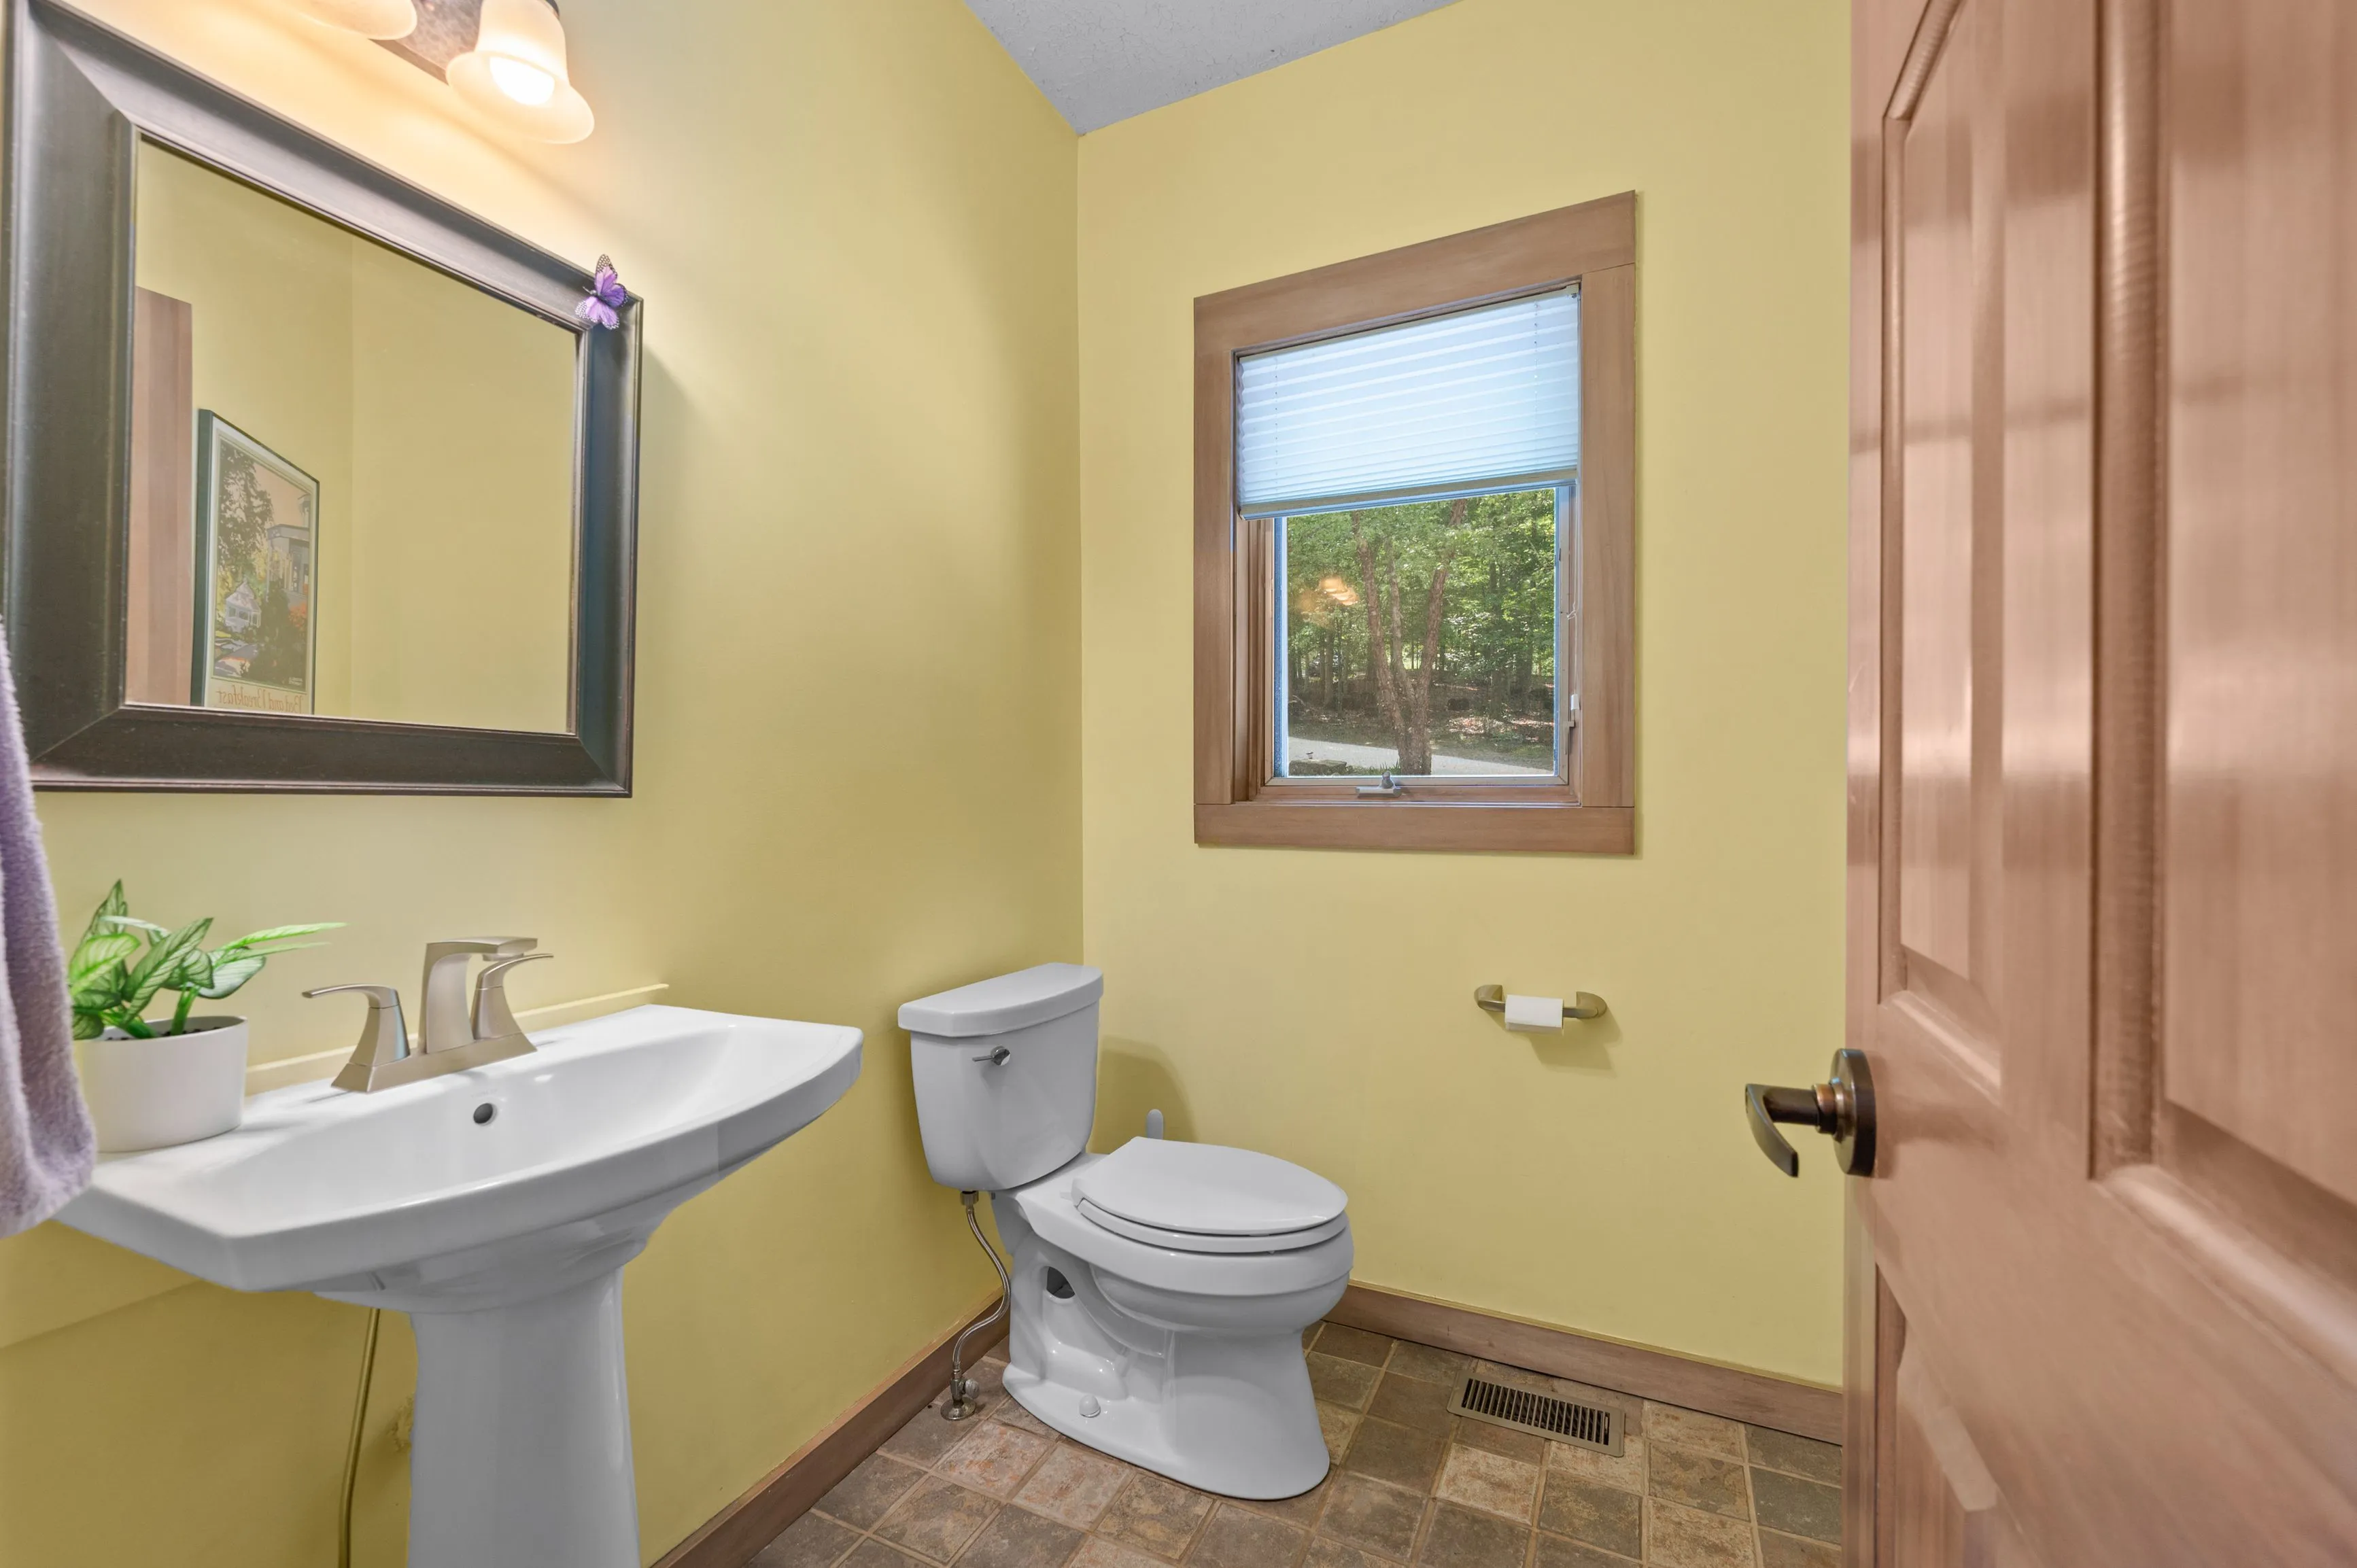 Interior of a small bathroom with yellow walls, white pedestal sink, toilet, and a shower curtain partially visible to the right. A window provides natural light.